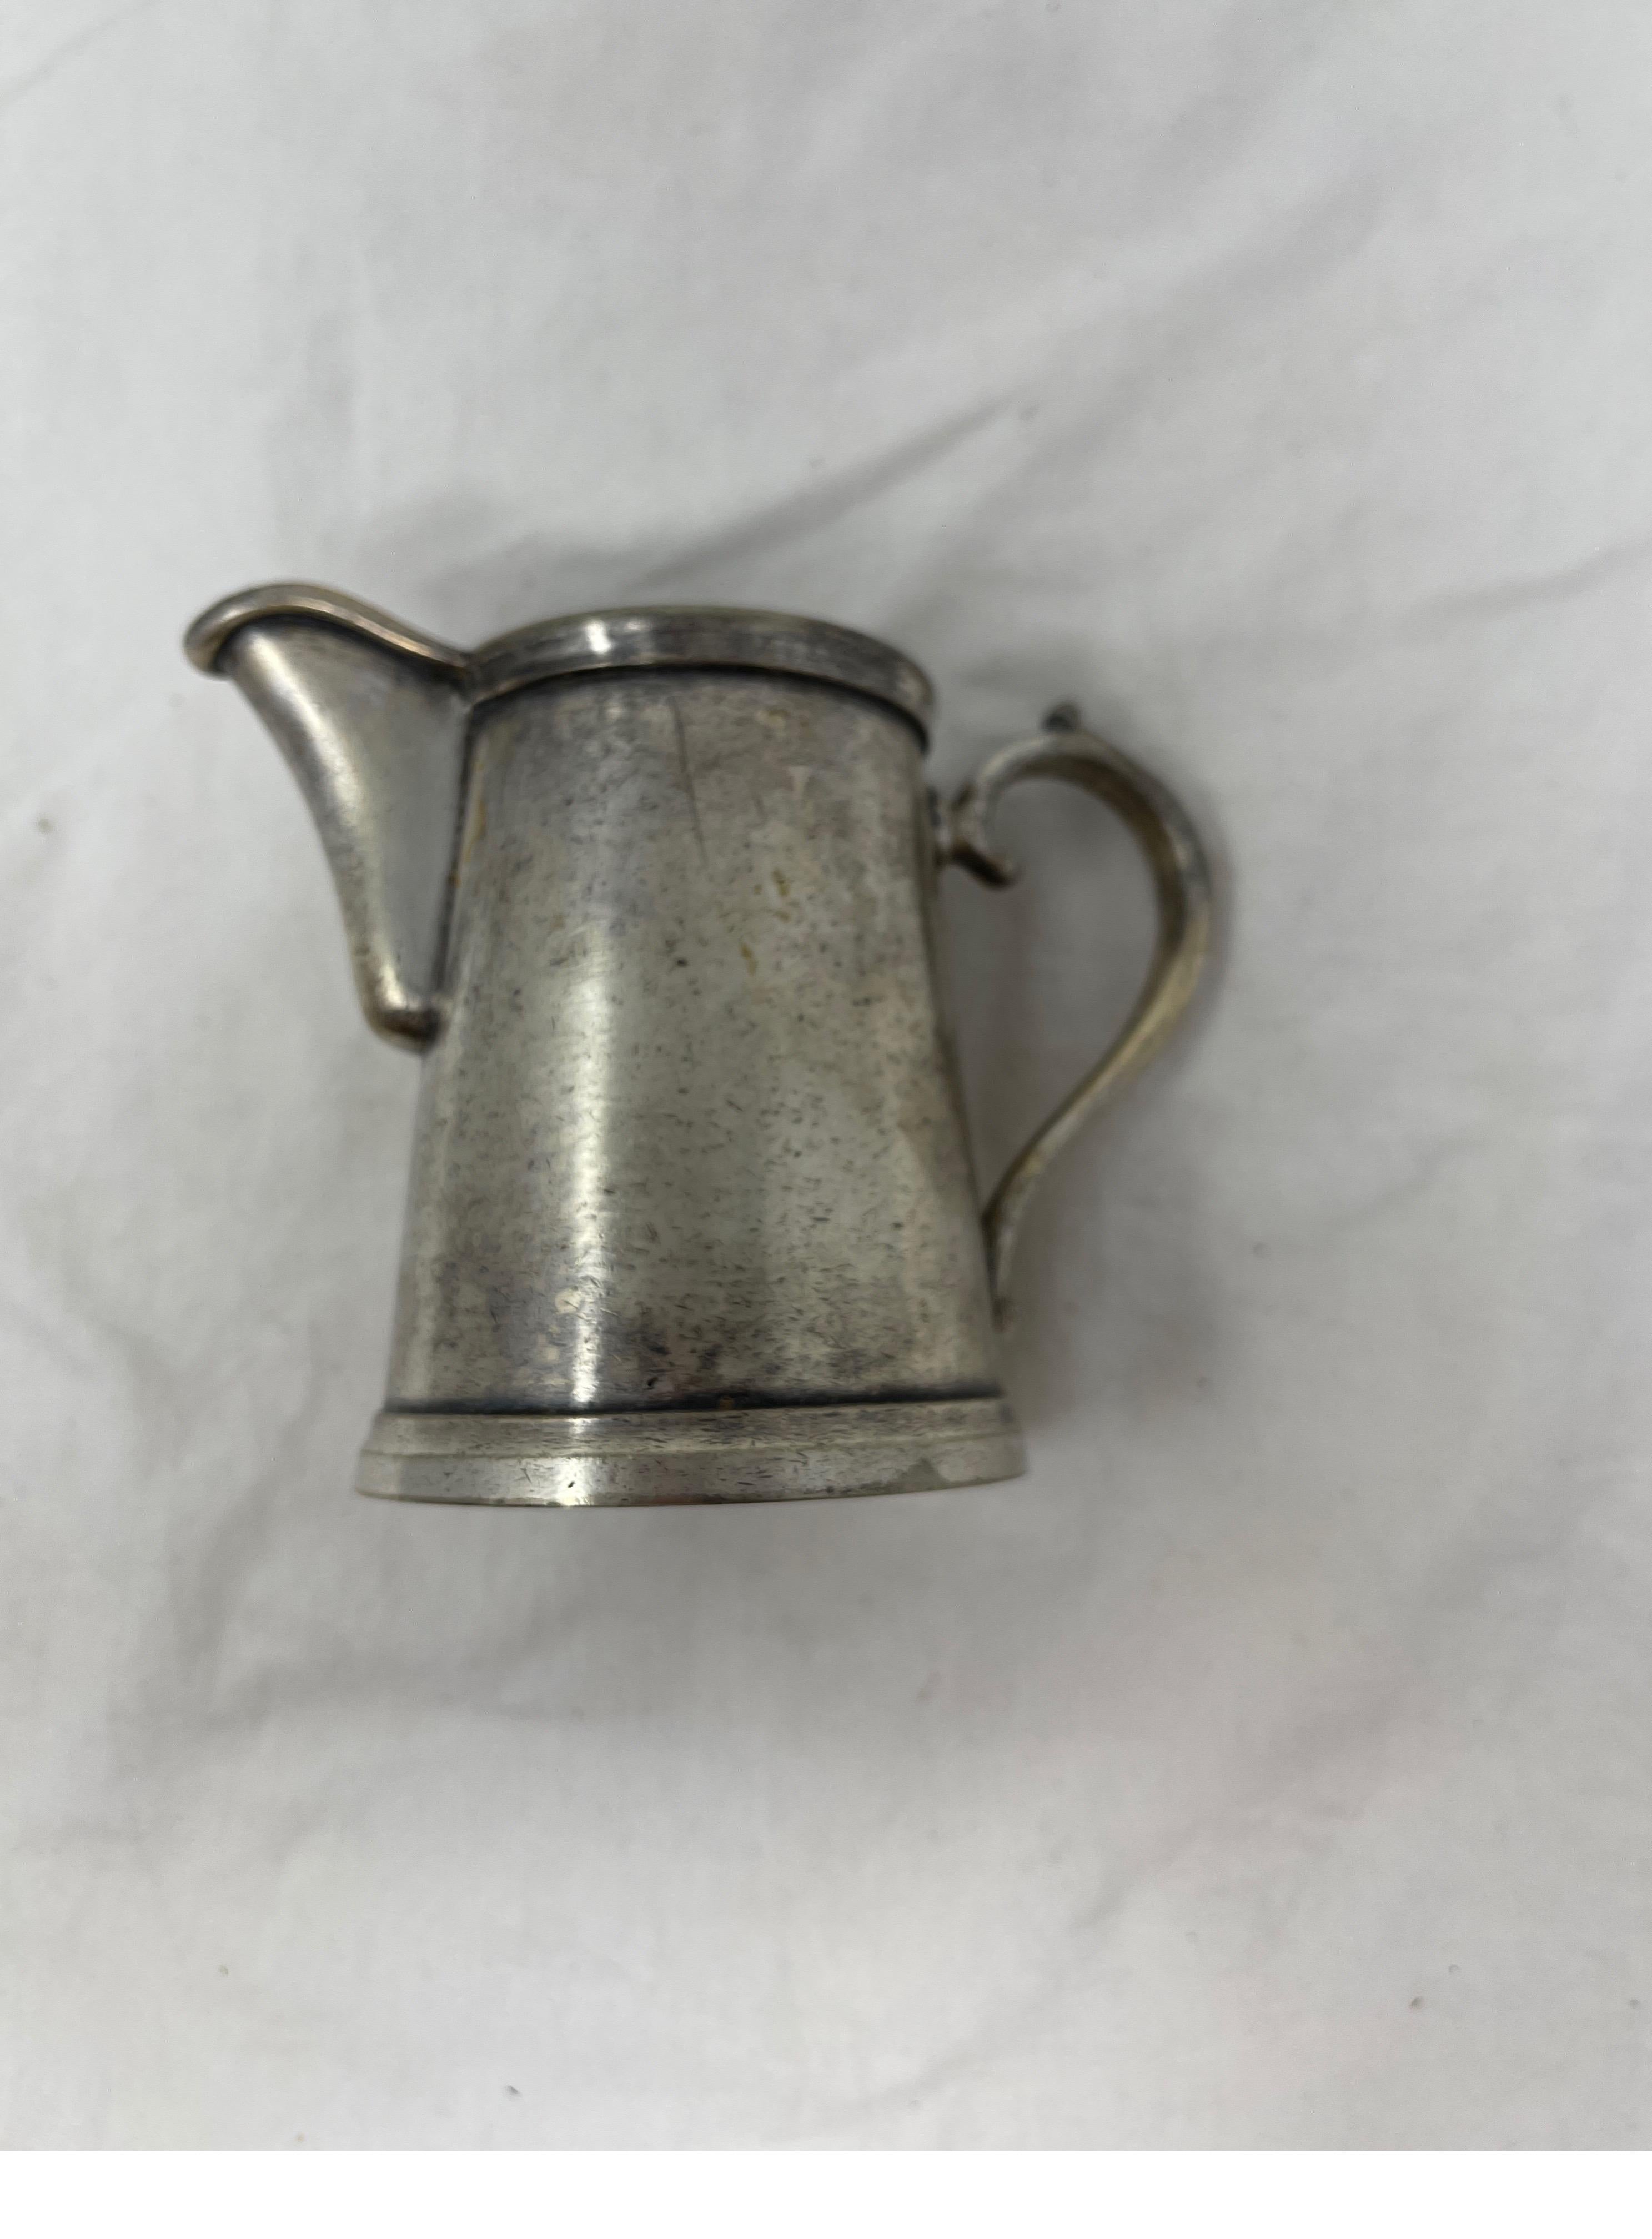 Make your coffee or tea time a luxury experience with this adorable Hotel Silver creamer. This beautiful piece can be used for what it was intended or make a lovely pencil/pen holder for a desk.

Measures: 2 3/8